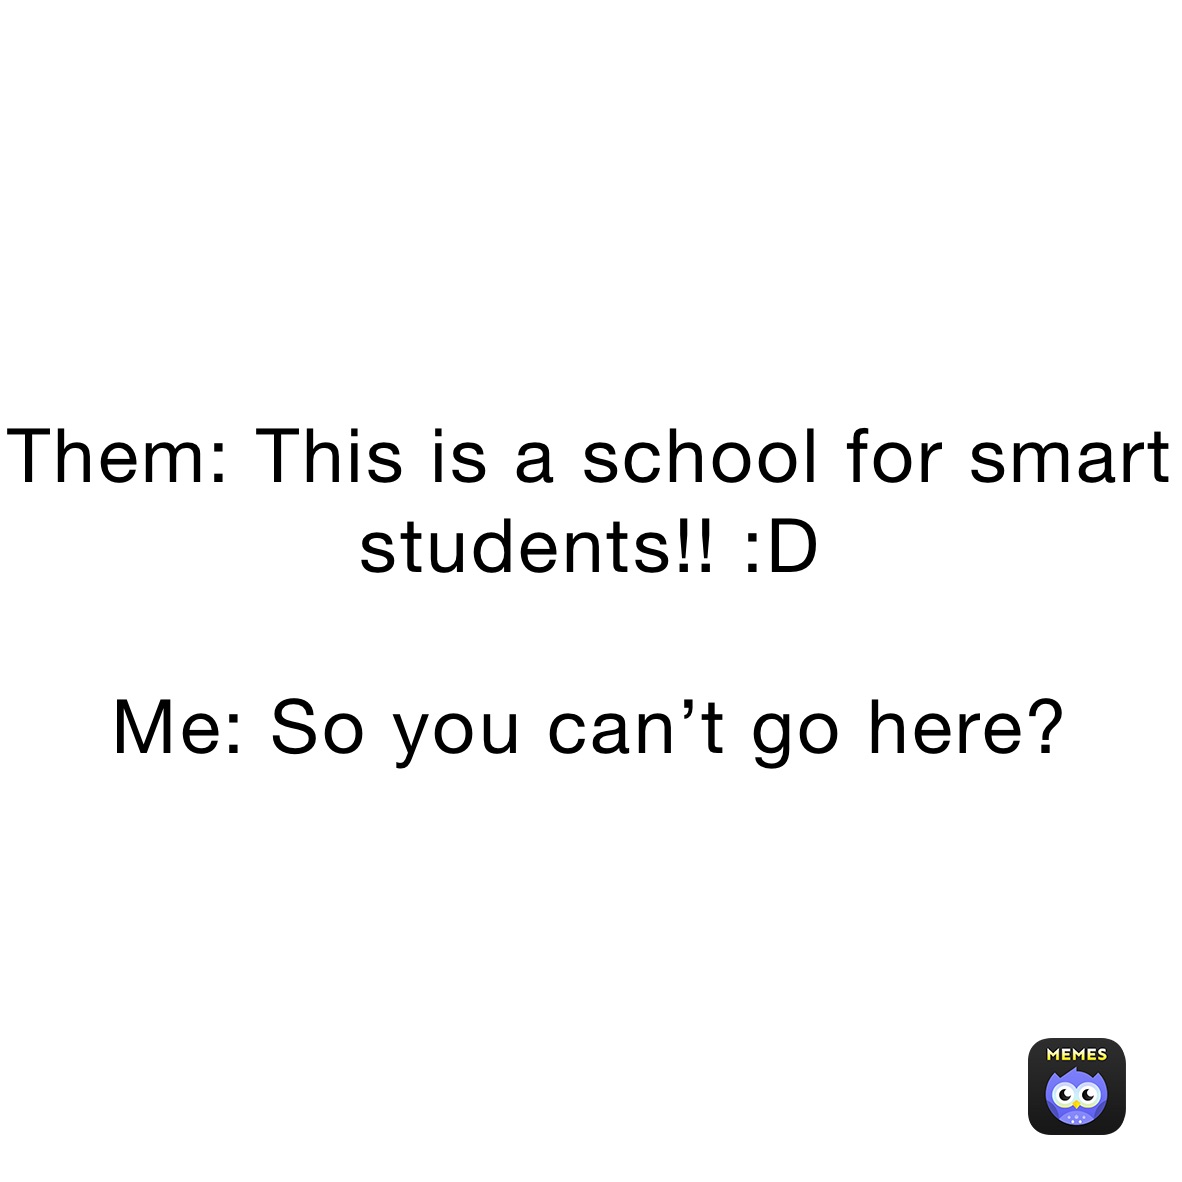 Them: This is a school for smart students!! :D

Me: So you can’t go here?